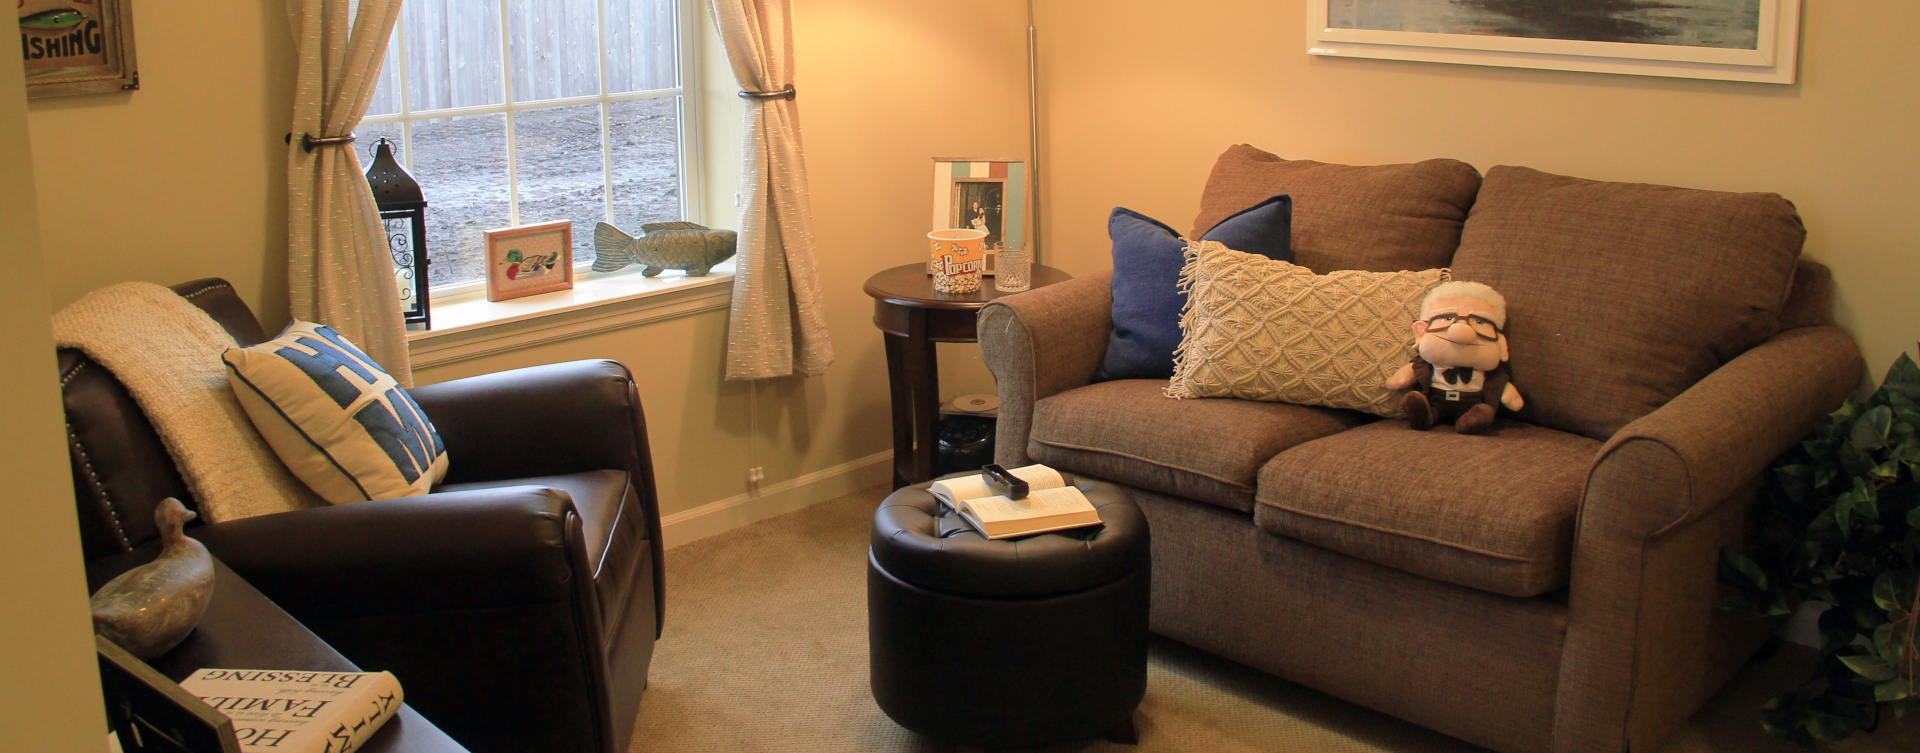 Get a new lease on life with a cozy apartment at Bickford of Tinley Park